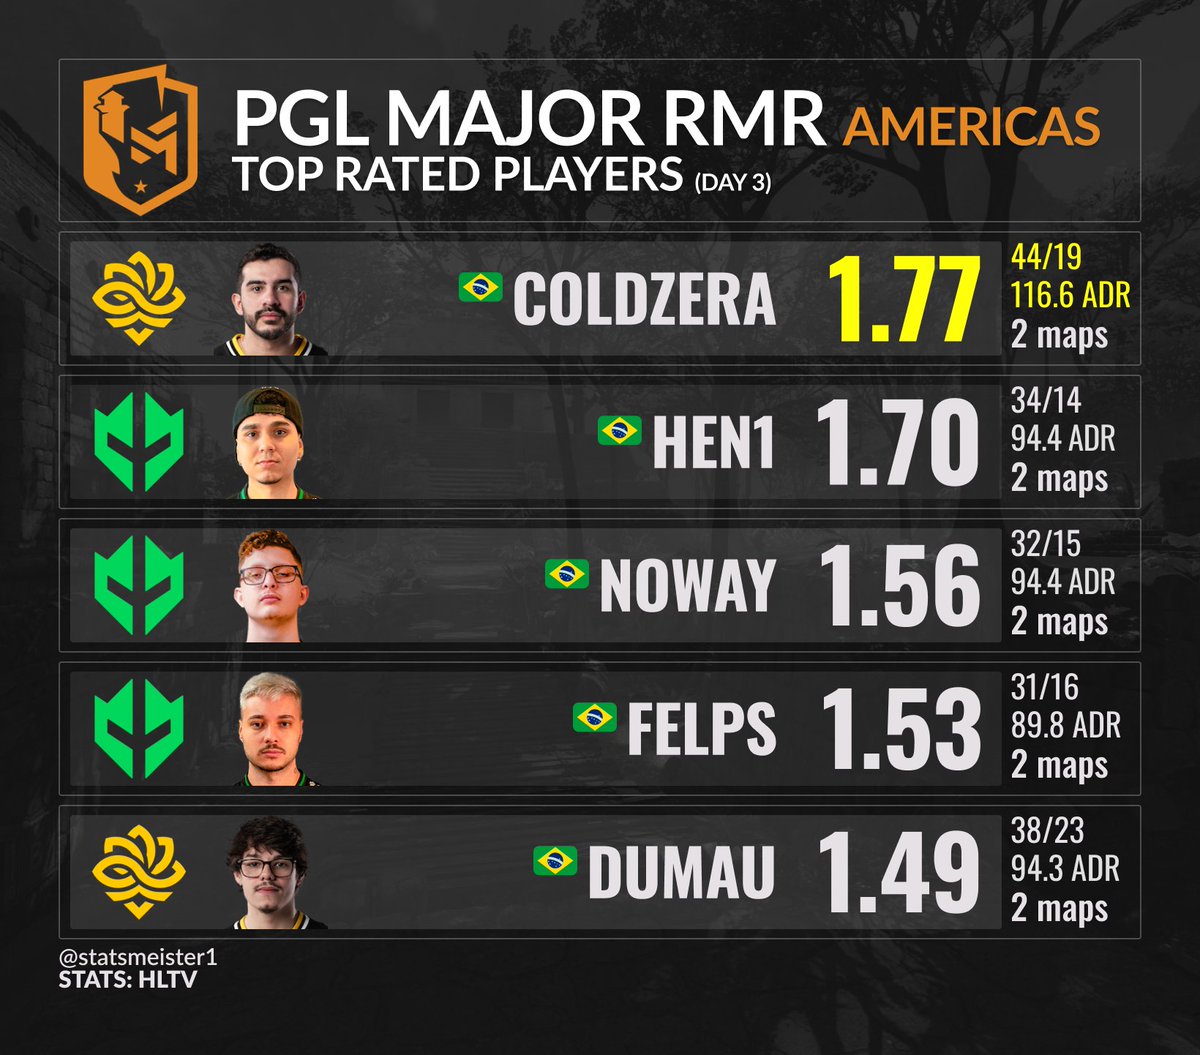 Best rated players from day 3 of #PGLRMR Americas